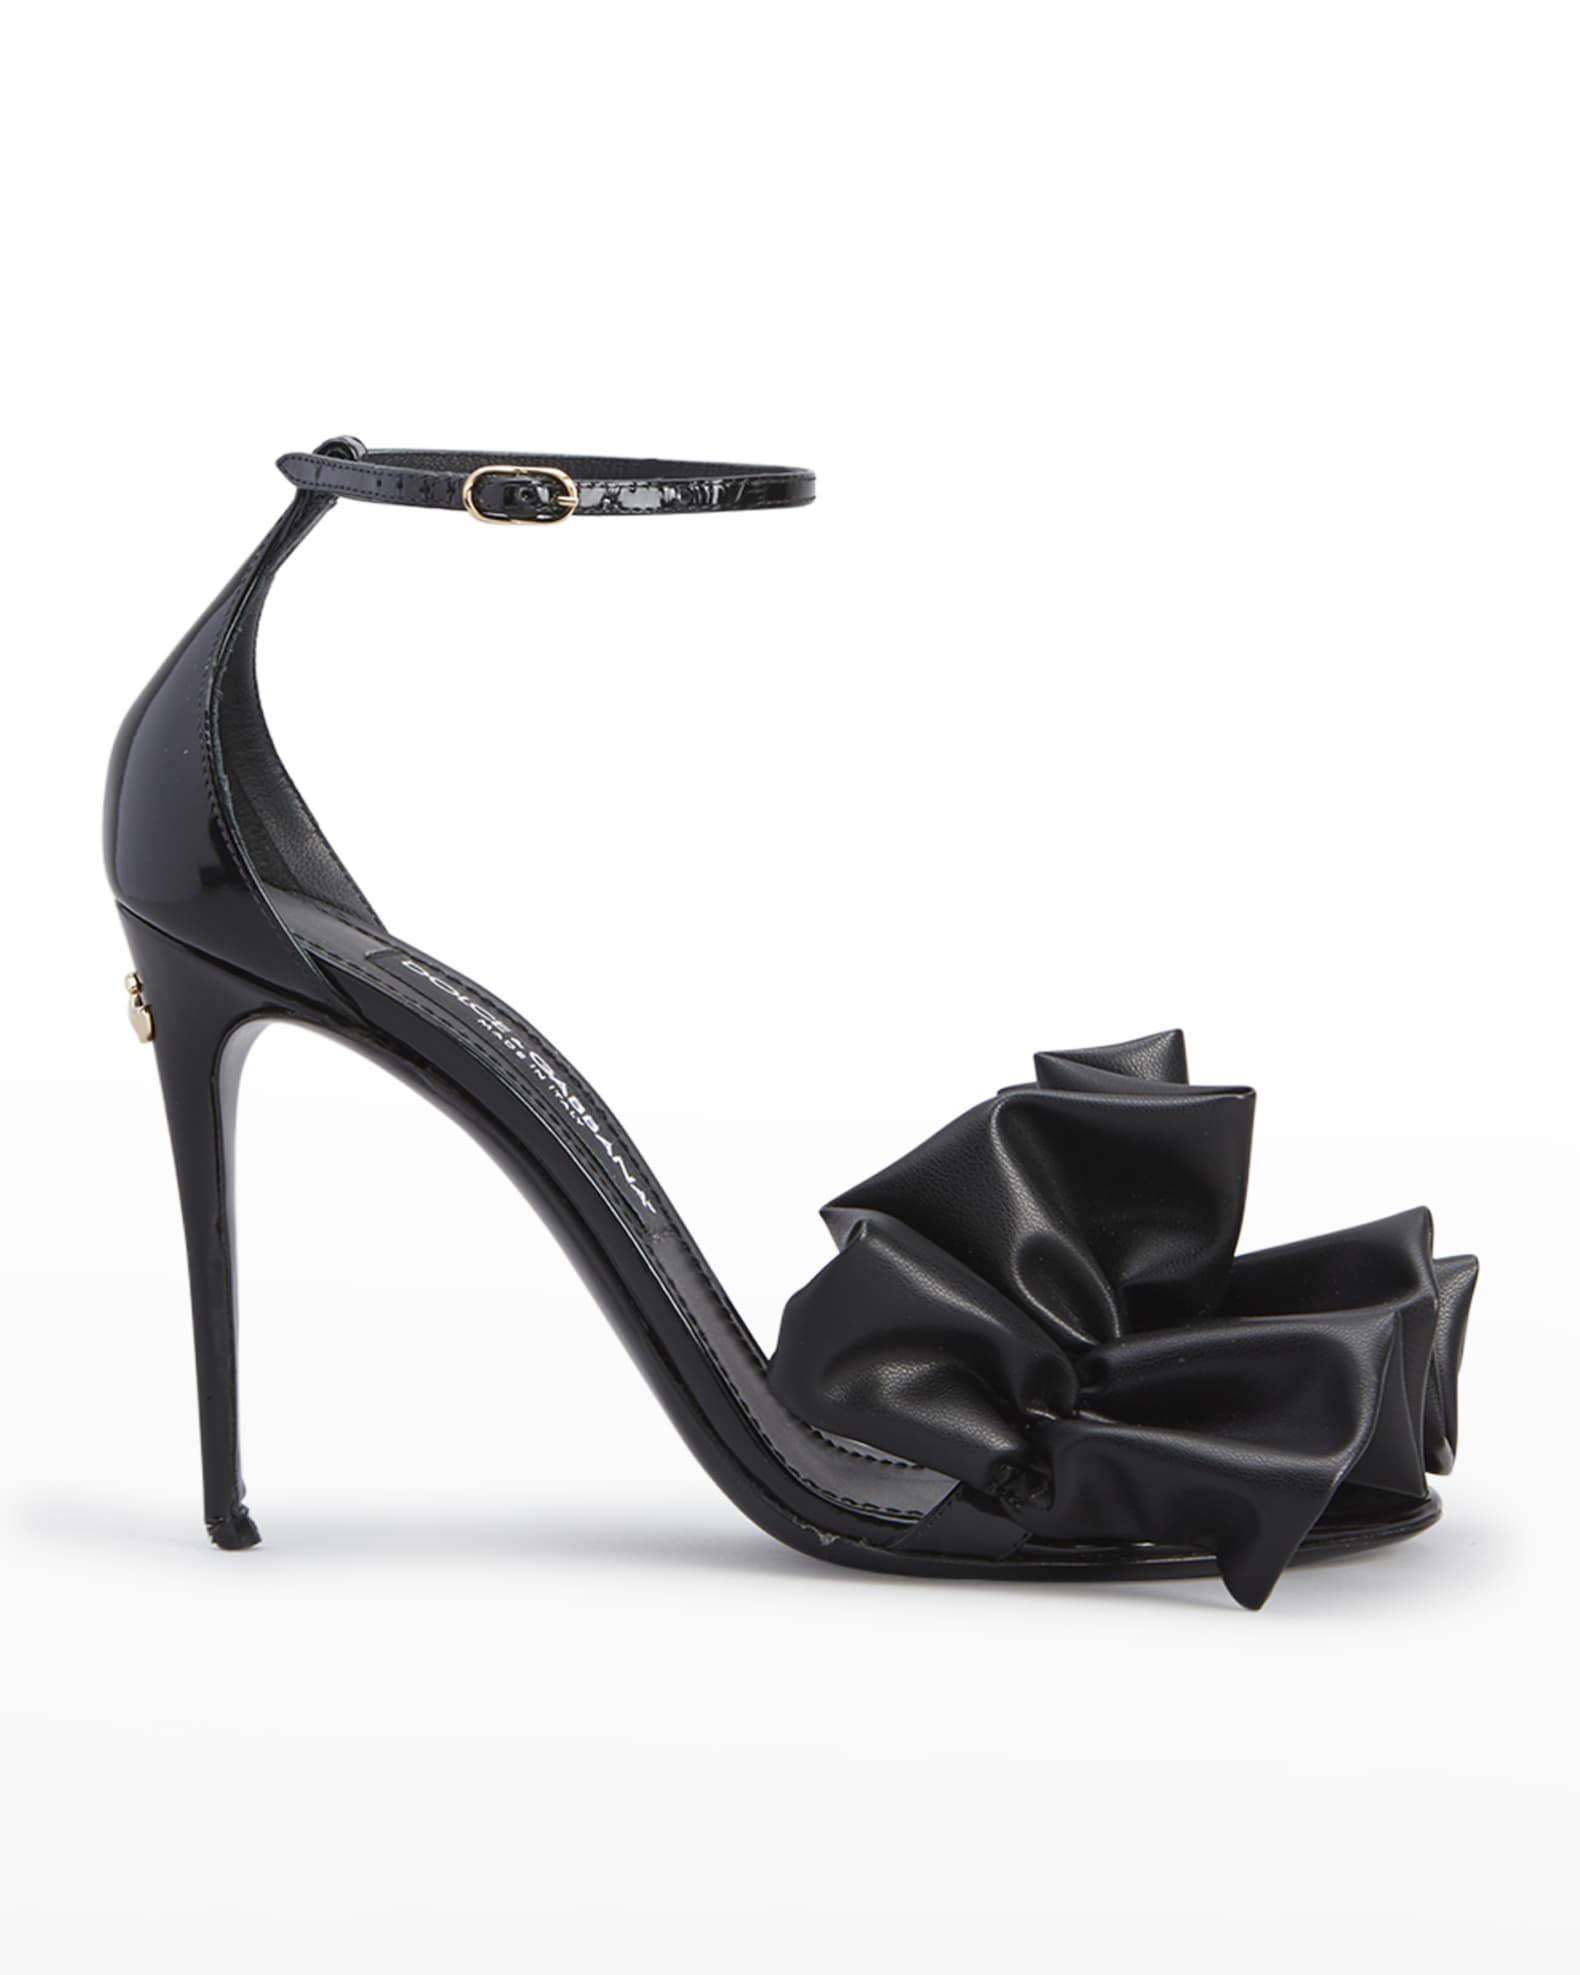 Dolce&Gabbana 105mm Leather Ruffle Ankle-Strap Sandals | Neiman Marcus